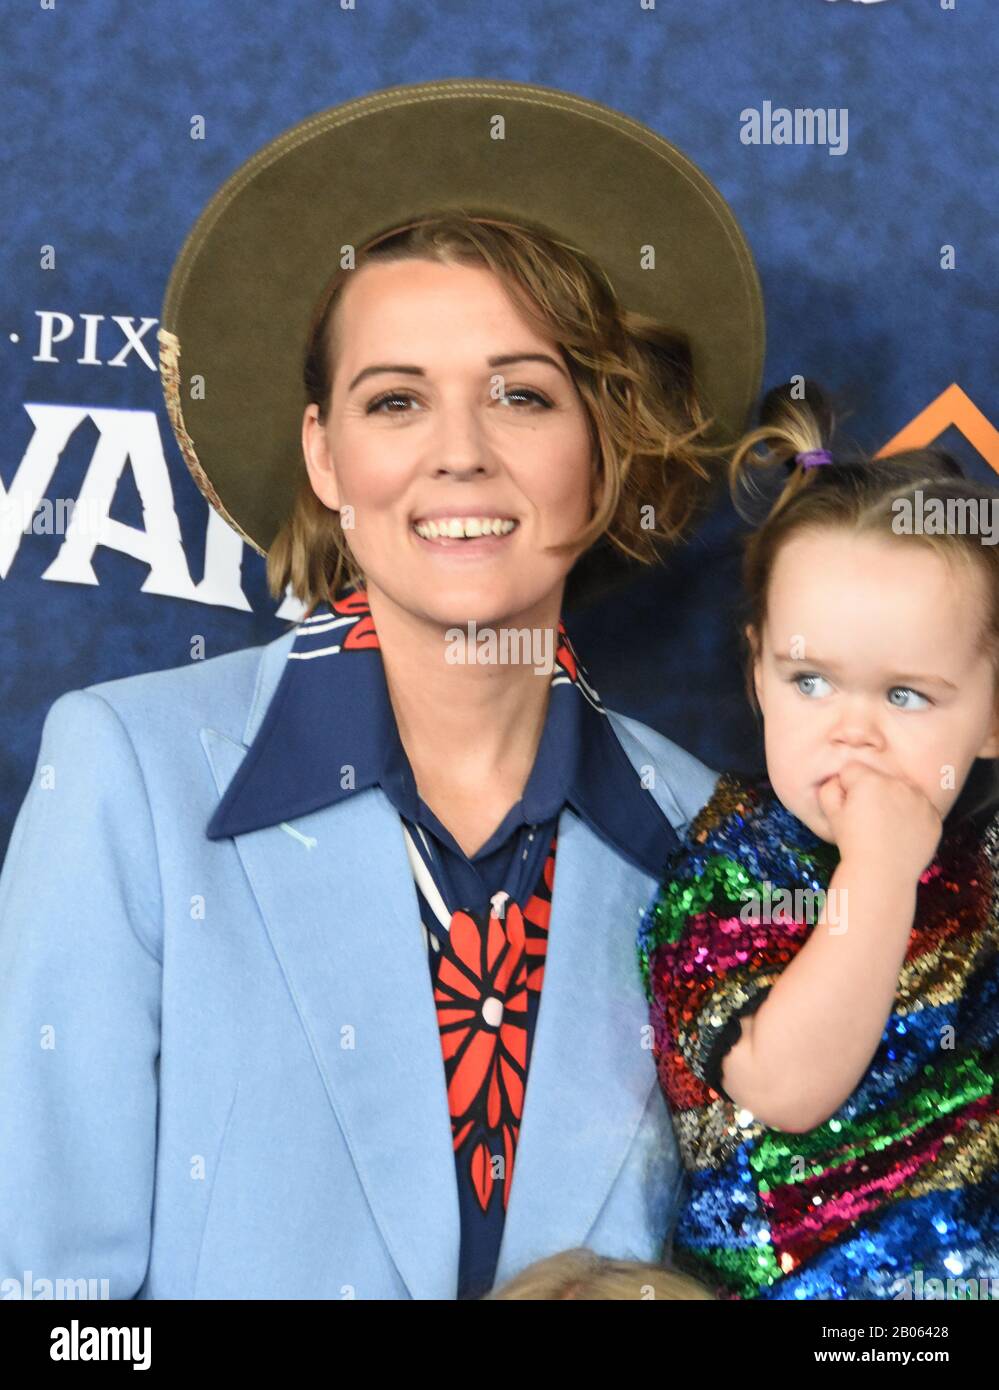 Hollywood, California, USA 18th February 2020 Singer/songwriter Brandi Carlile and daughter Elijah attend Disney Pixar 'Onward' World Premiere on February 18, 2020 at the El Capitan Theatre in Hollywood, California, USA. Photo by Barry King/Alamy Live News Stock Photo